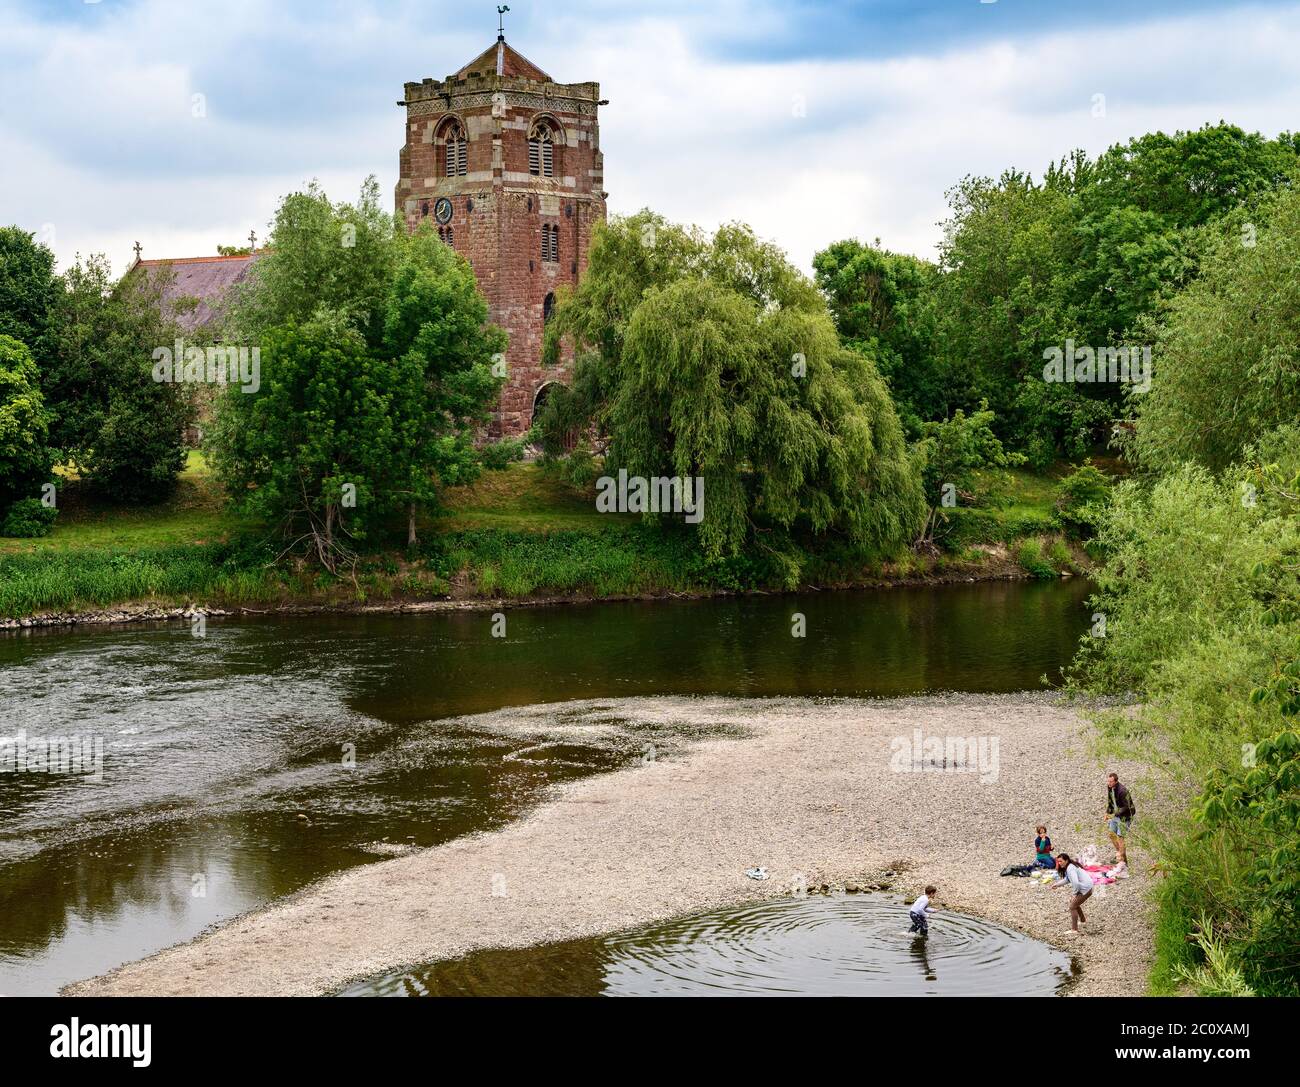 Summer on the banks of the river Severn in Shrewsbury, Shropshire Stock Photo